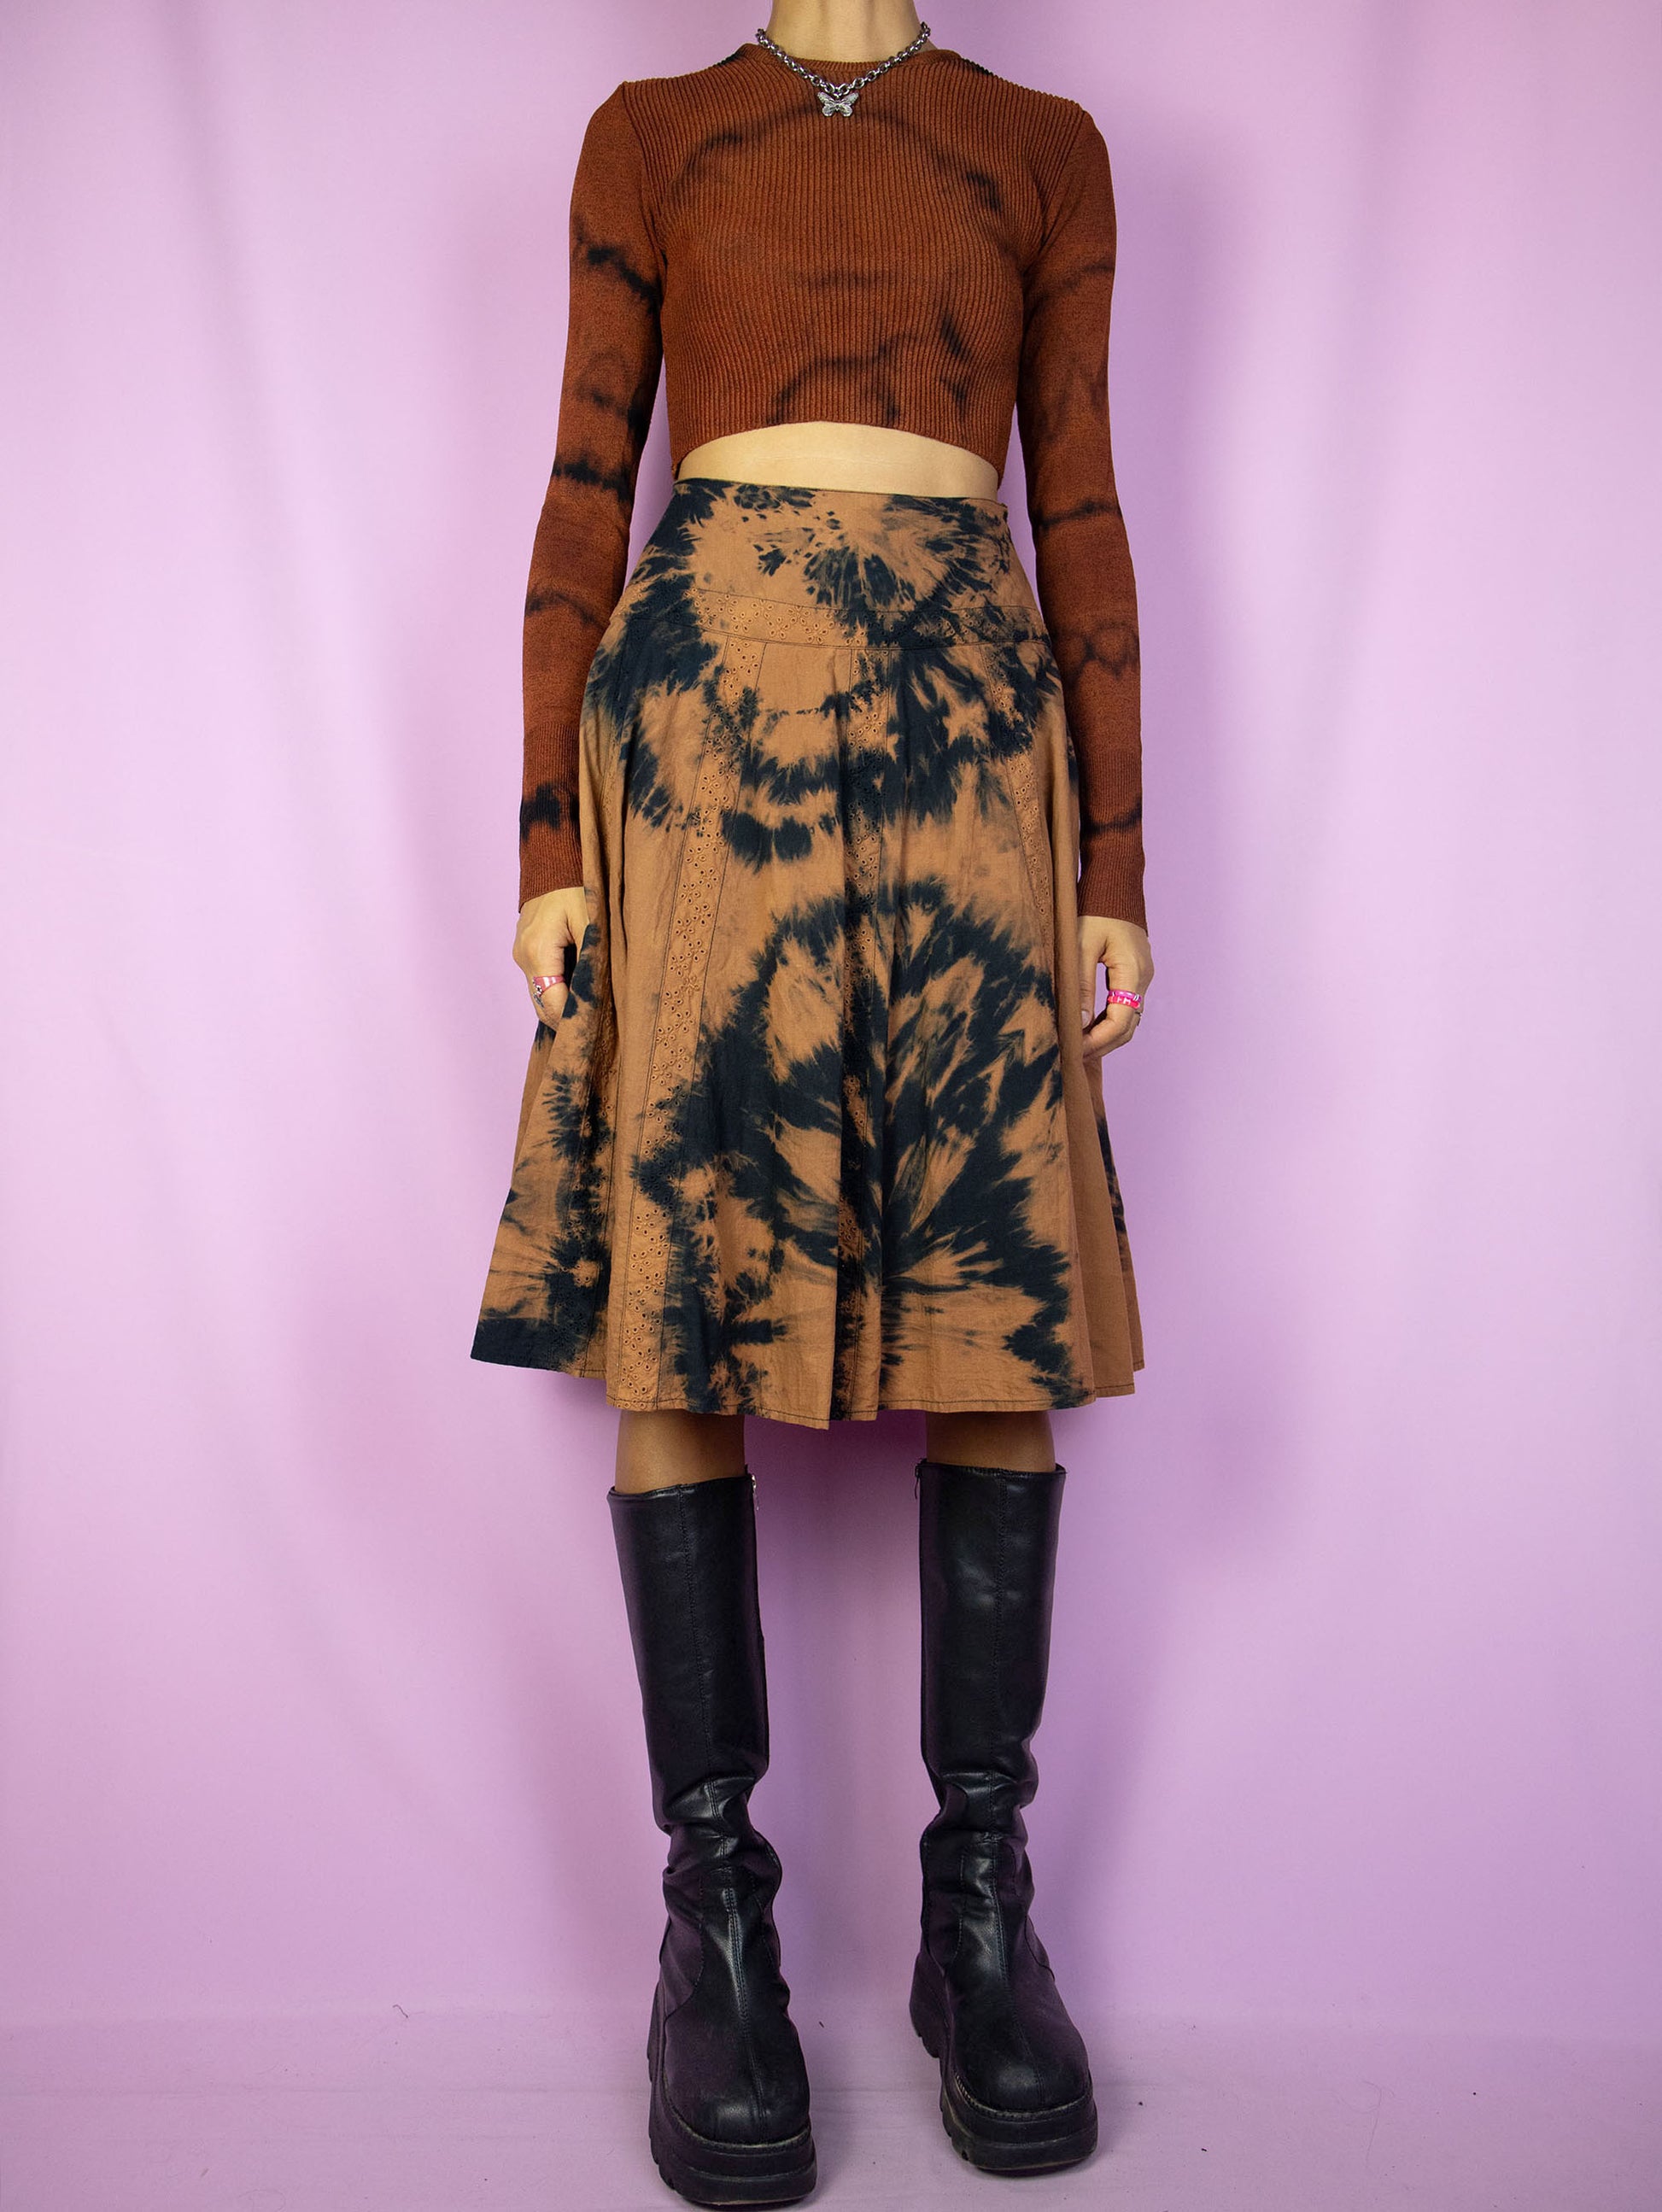 The Vintage 90s Tie Dye Midi Skirt is a brown and black bleached skirt with a side zipper closure. Boho summer festival 1990s psychedelic skirt.